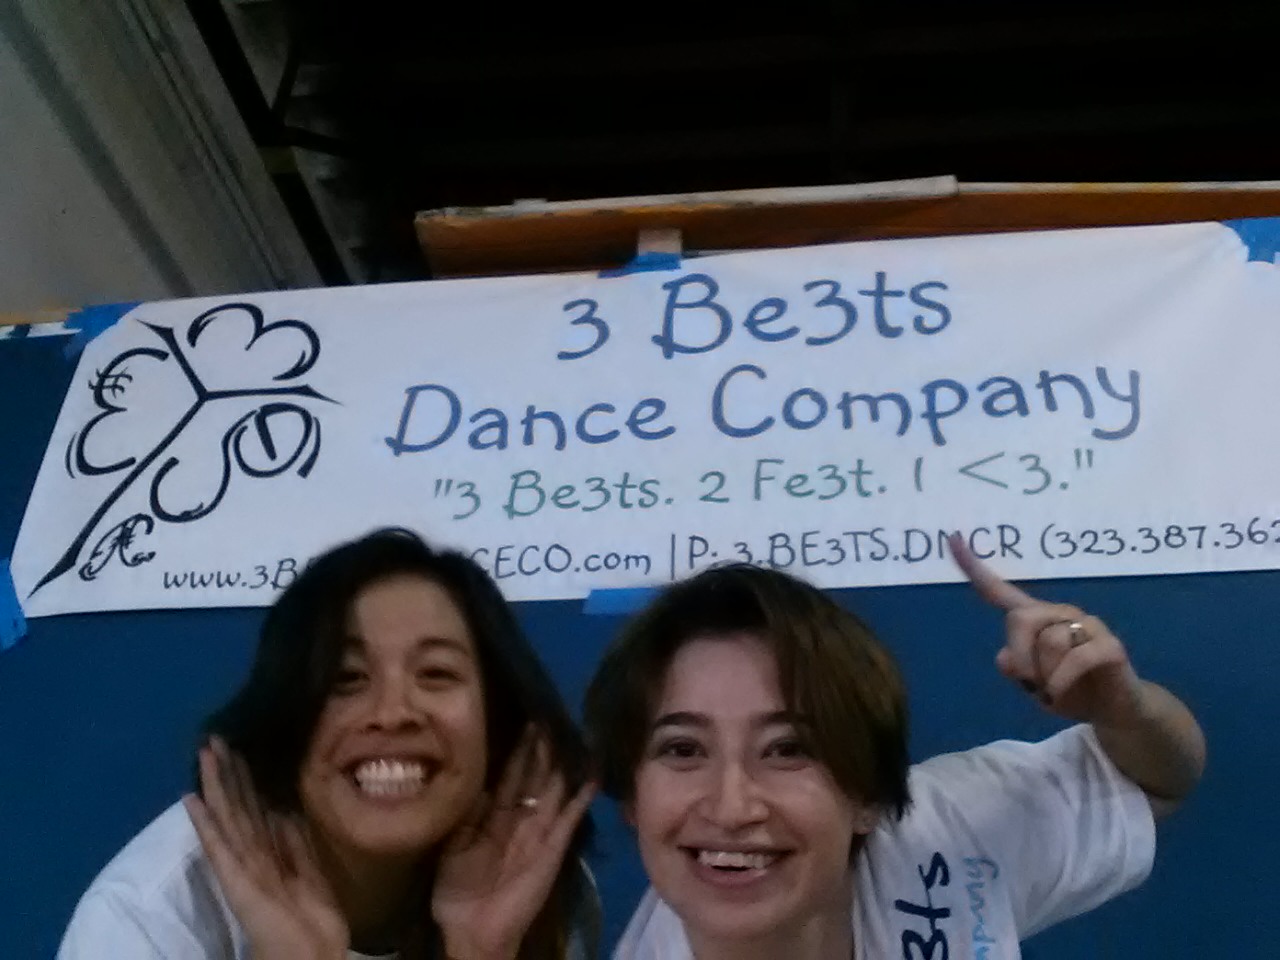  All Smiles at 3 Be3ts Dance Company! 